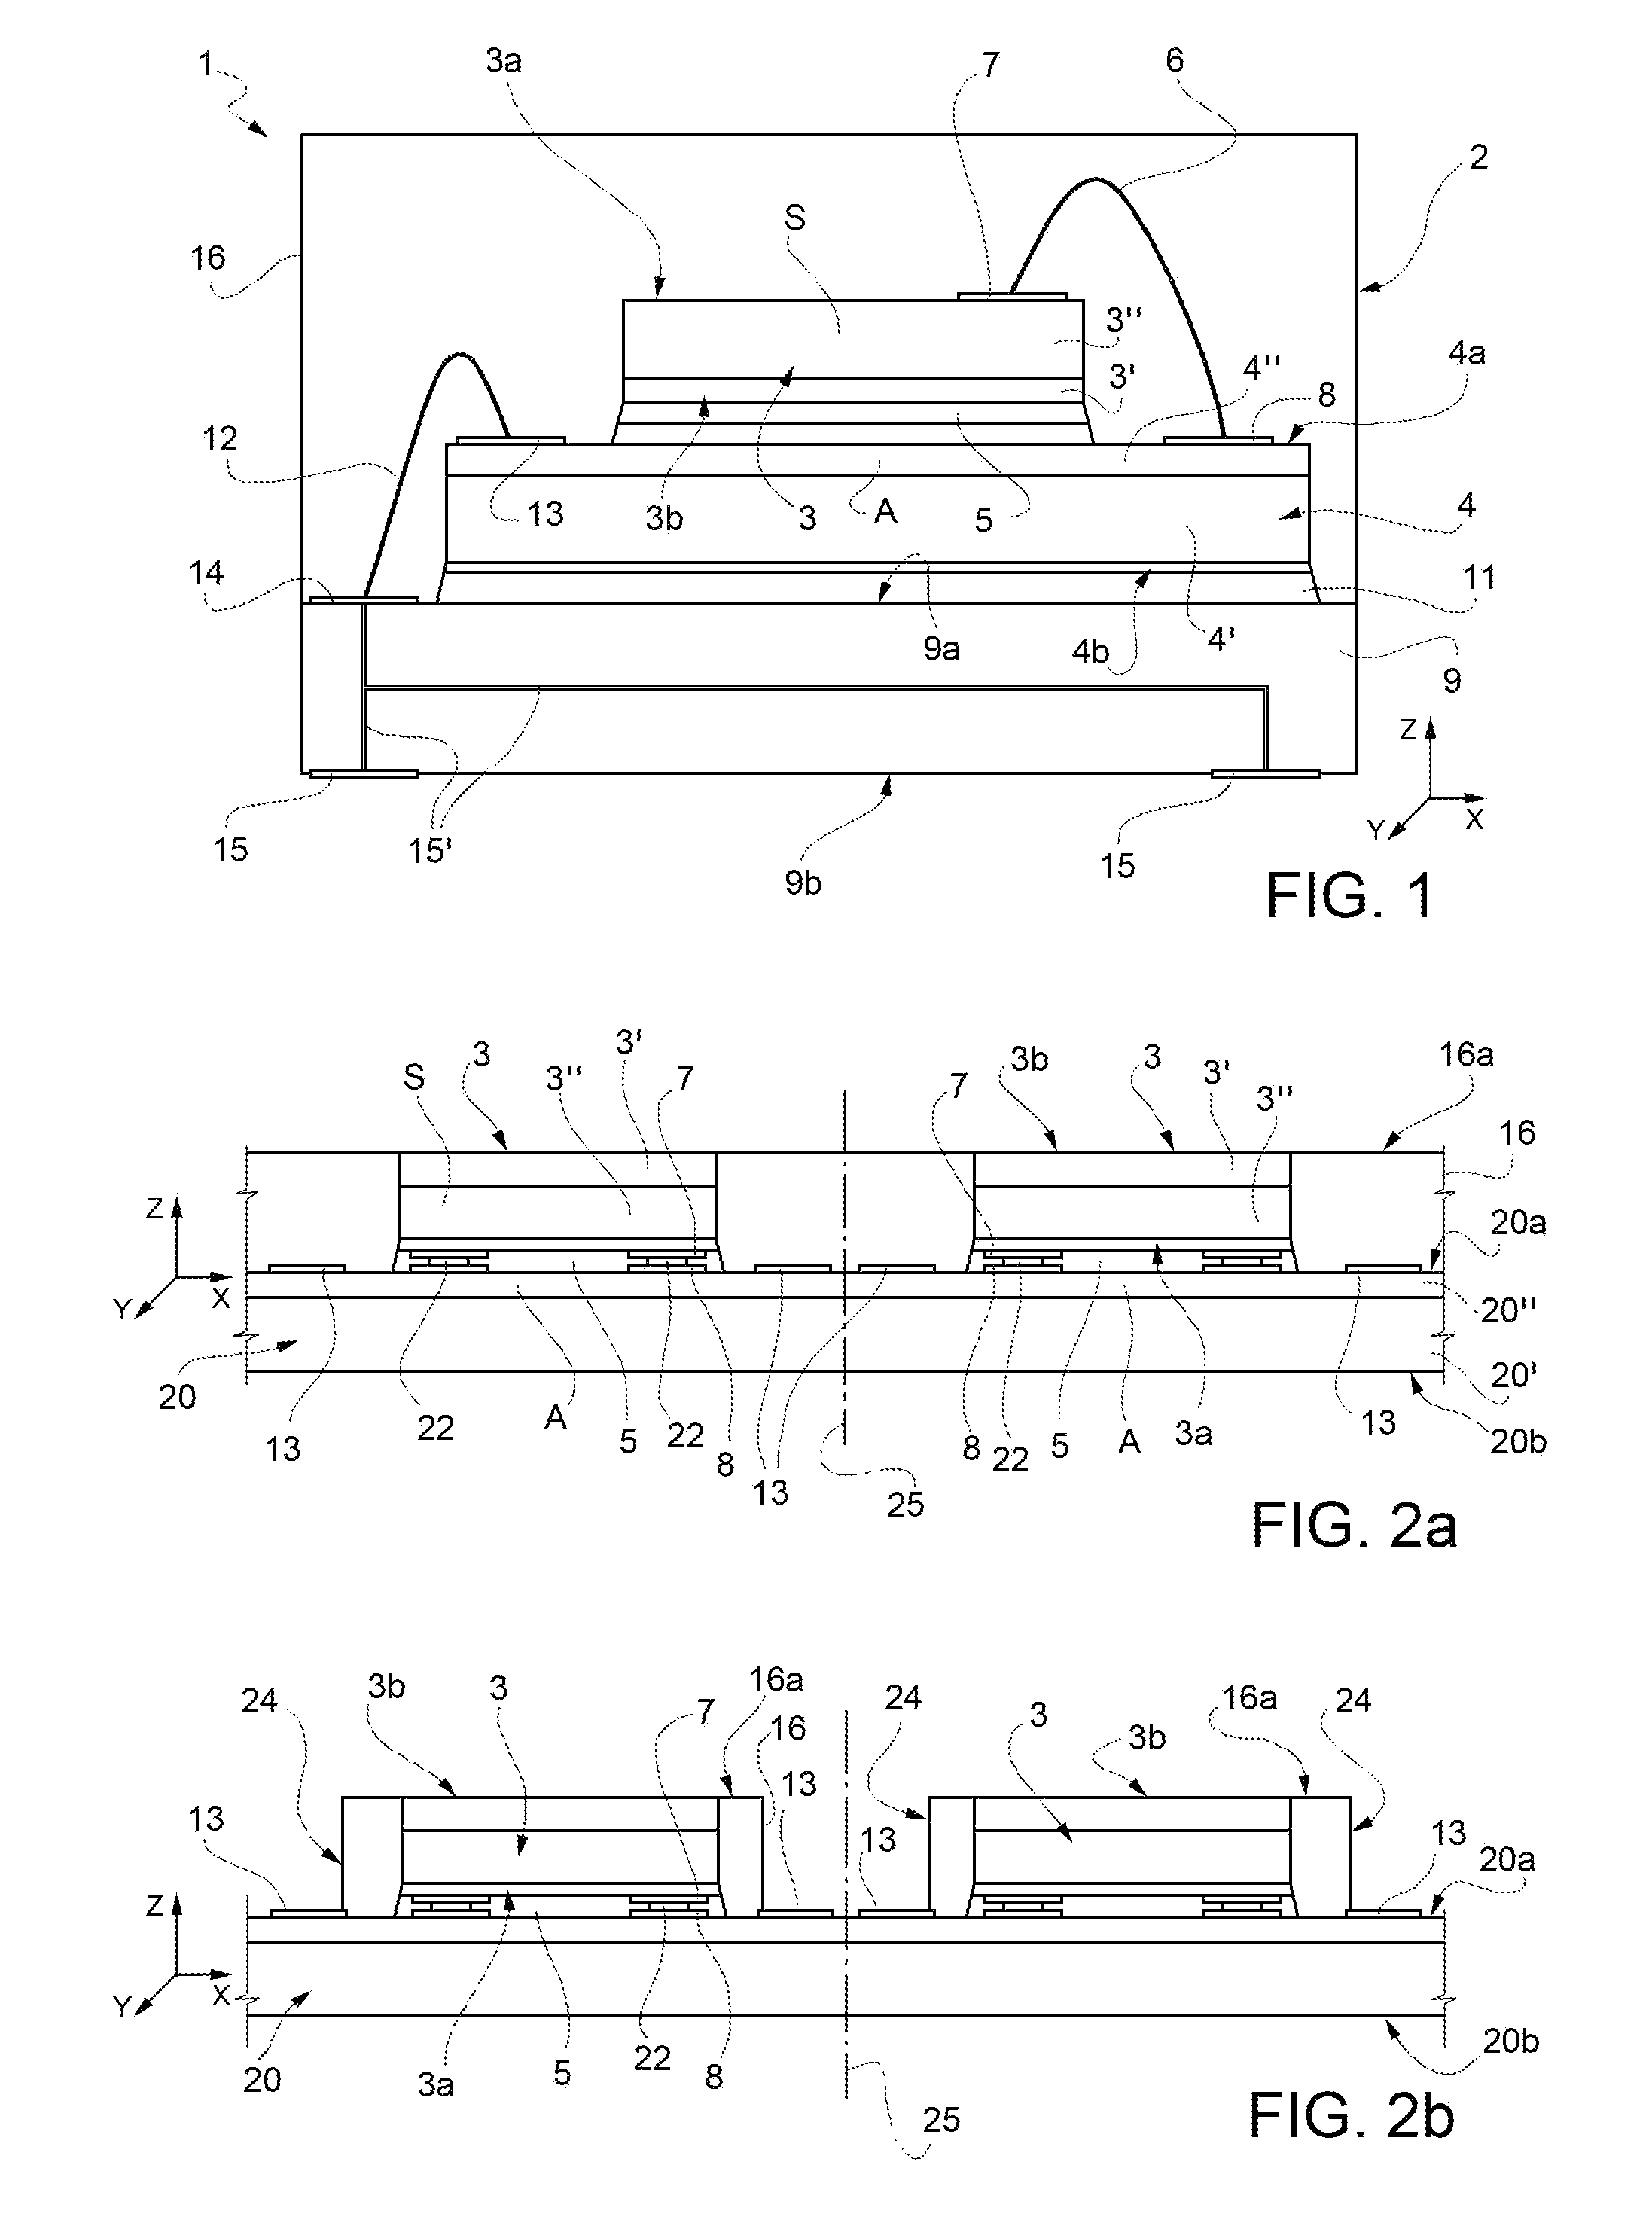 Wafer level package for a MEMS sensor device and corresponding manufacturing process